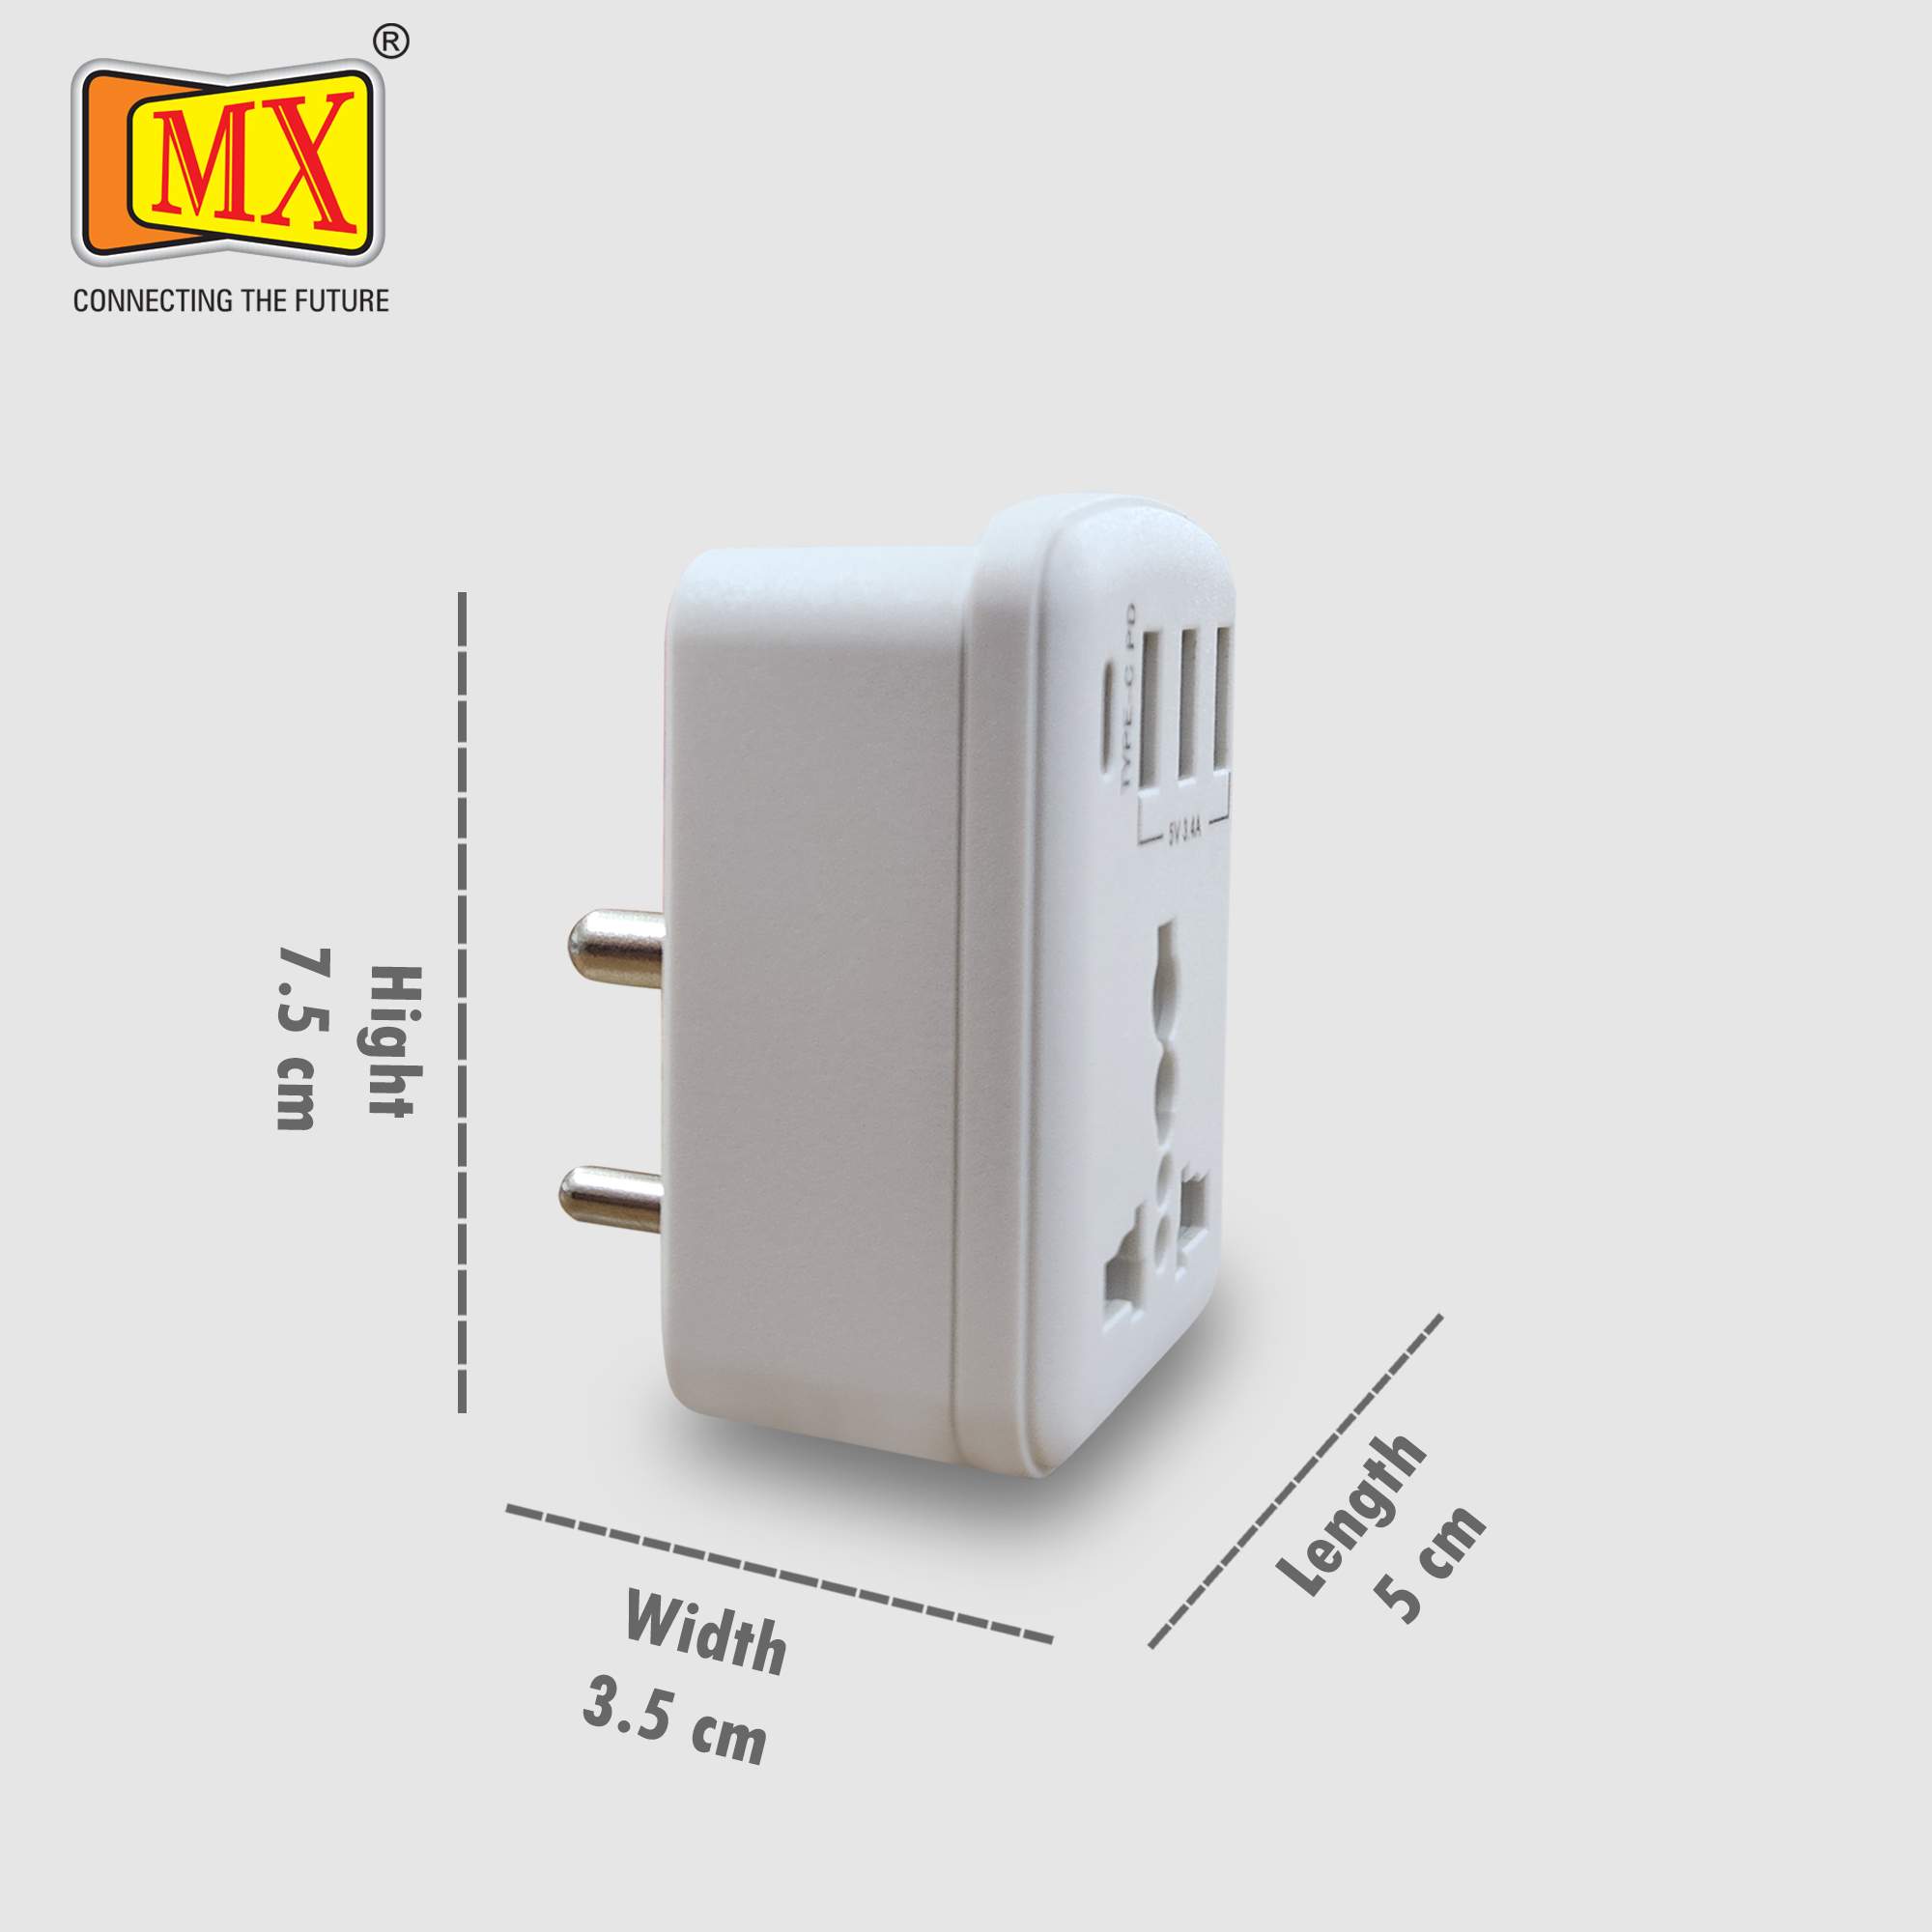 MX USB C Charger Type-C PD (5V/3A) & Triple USB Ports (5V 3.4A Fast  Charging Ports)- 5 in One usb c type adapter - MX MDR TECHNOLOGIES LIMITED